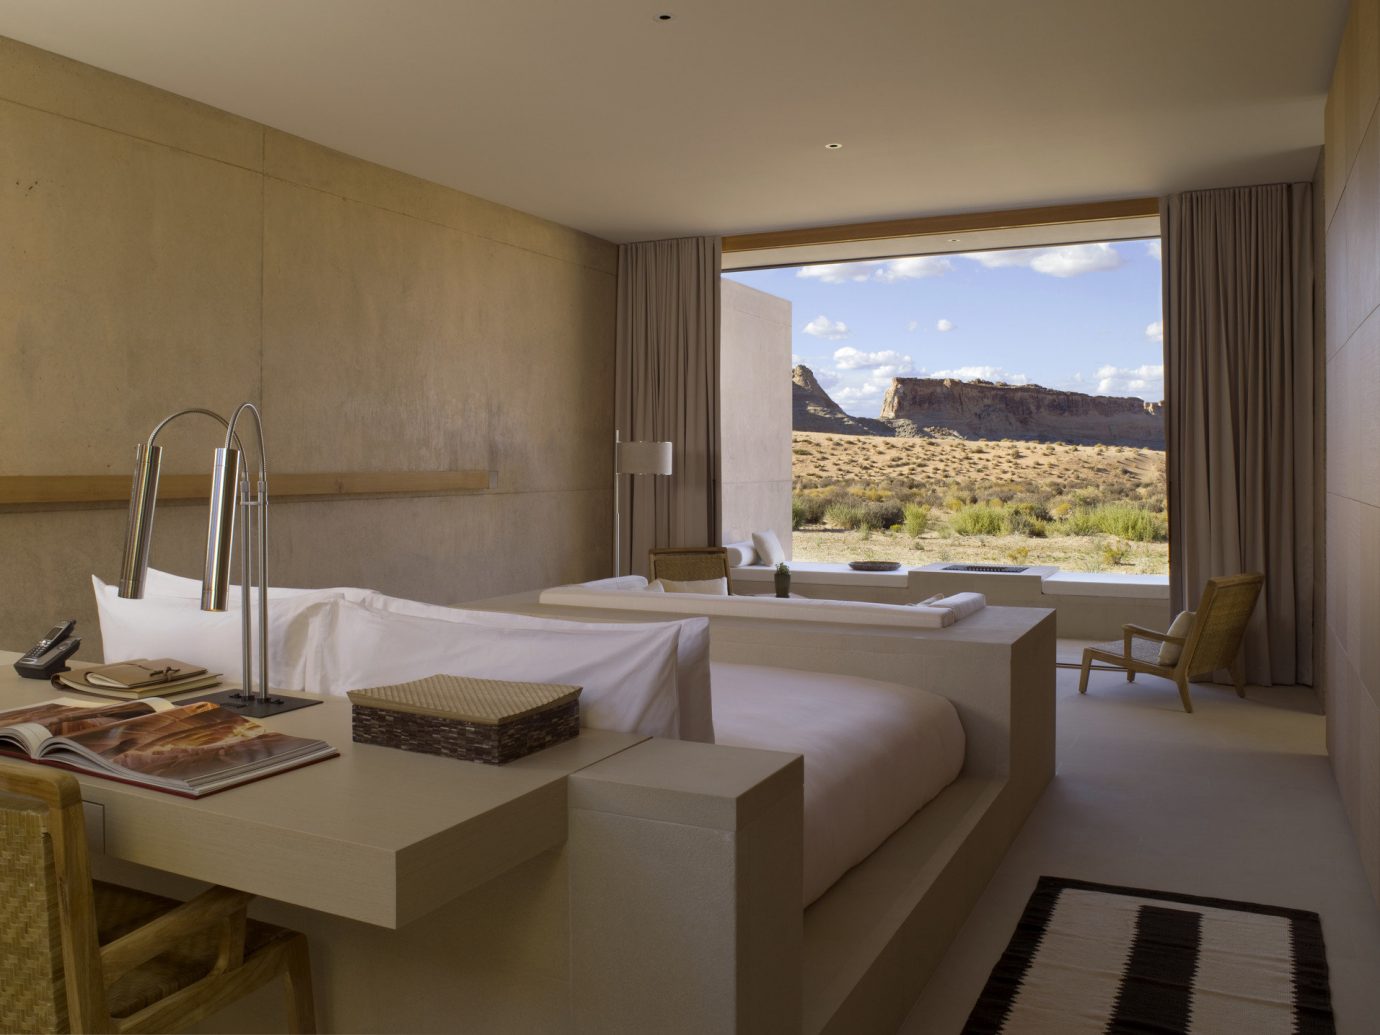 Hotel room with view of desert scape at Amangri